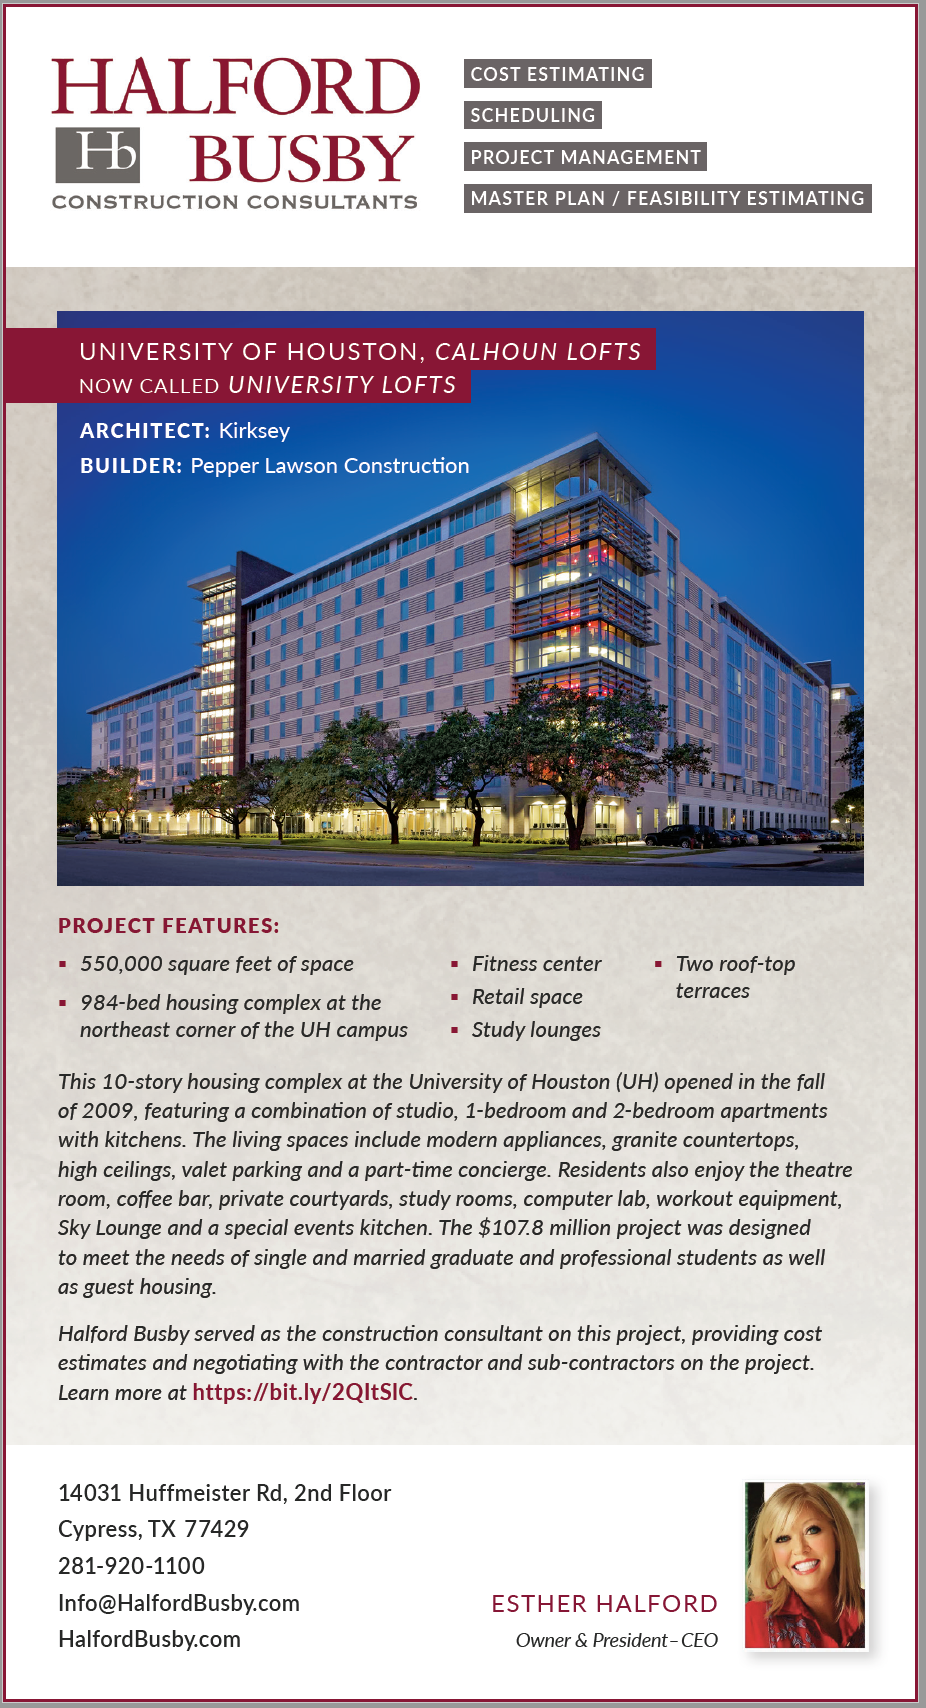 Halford Busby ad in Tx Architect Magazine on Project with UH's Calhoun Lofts